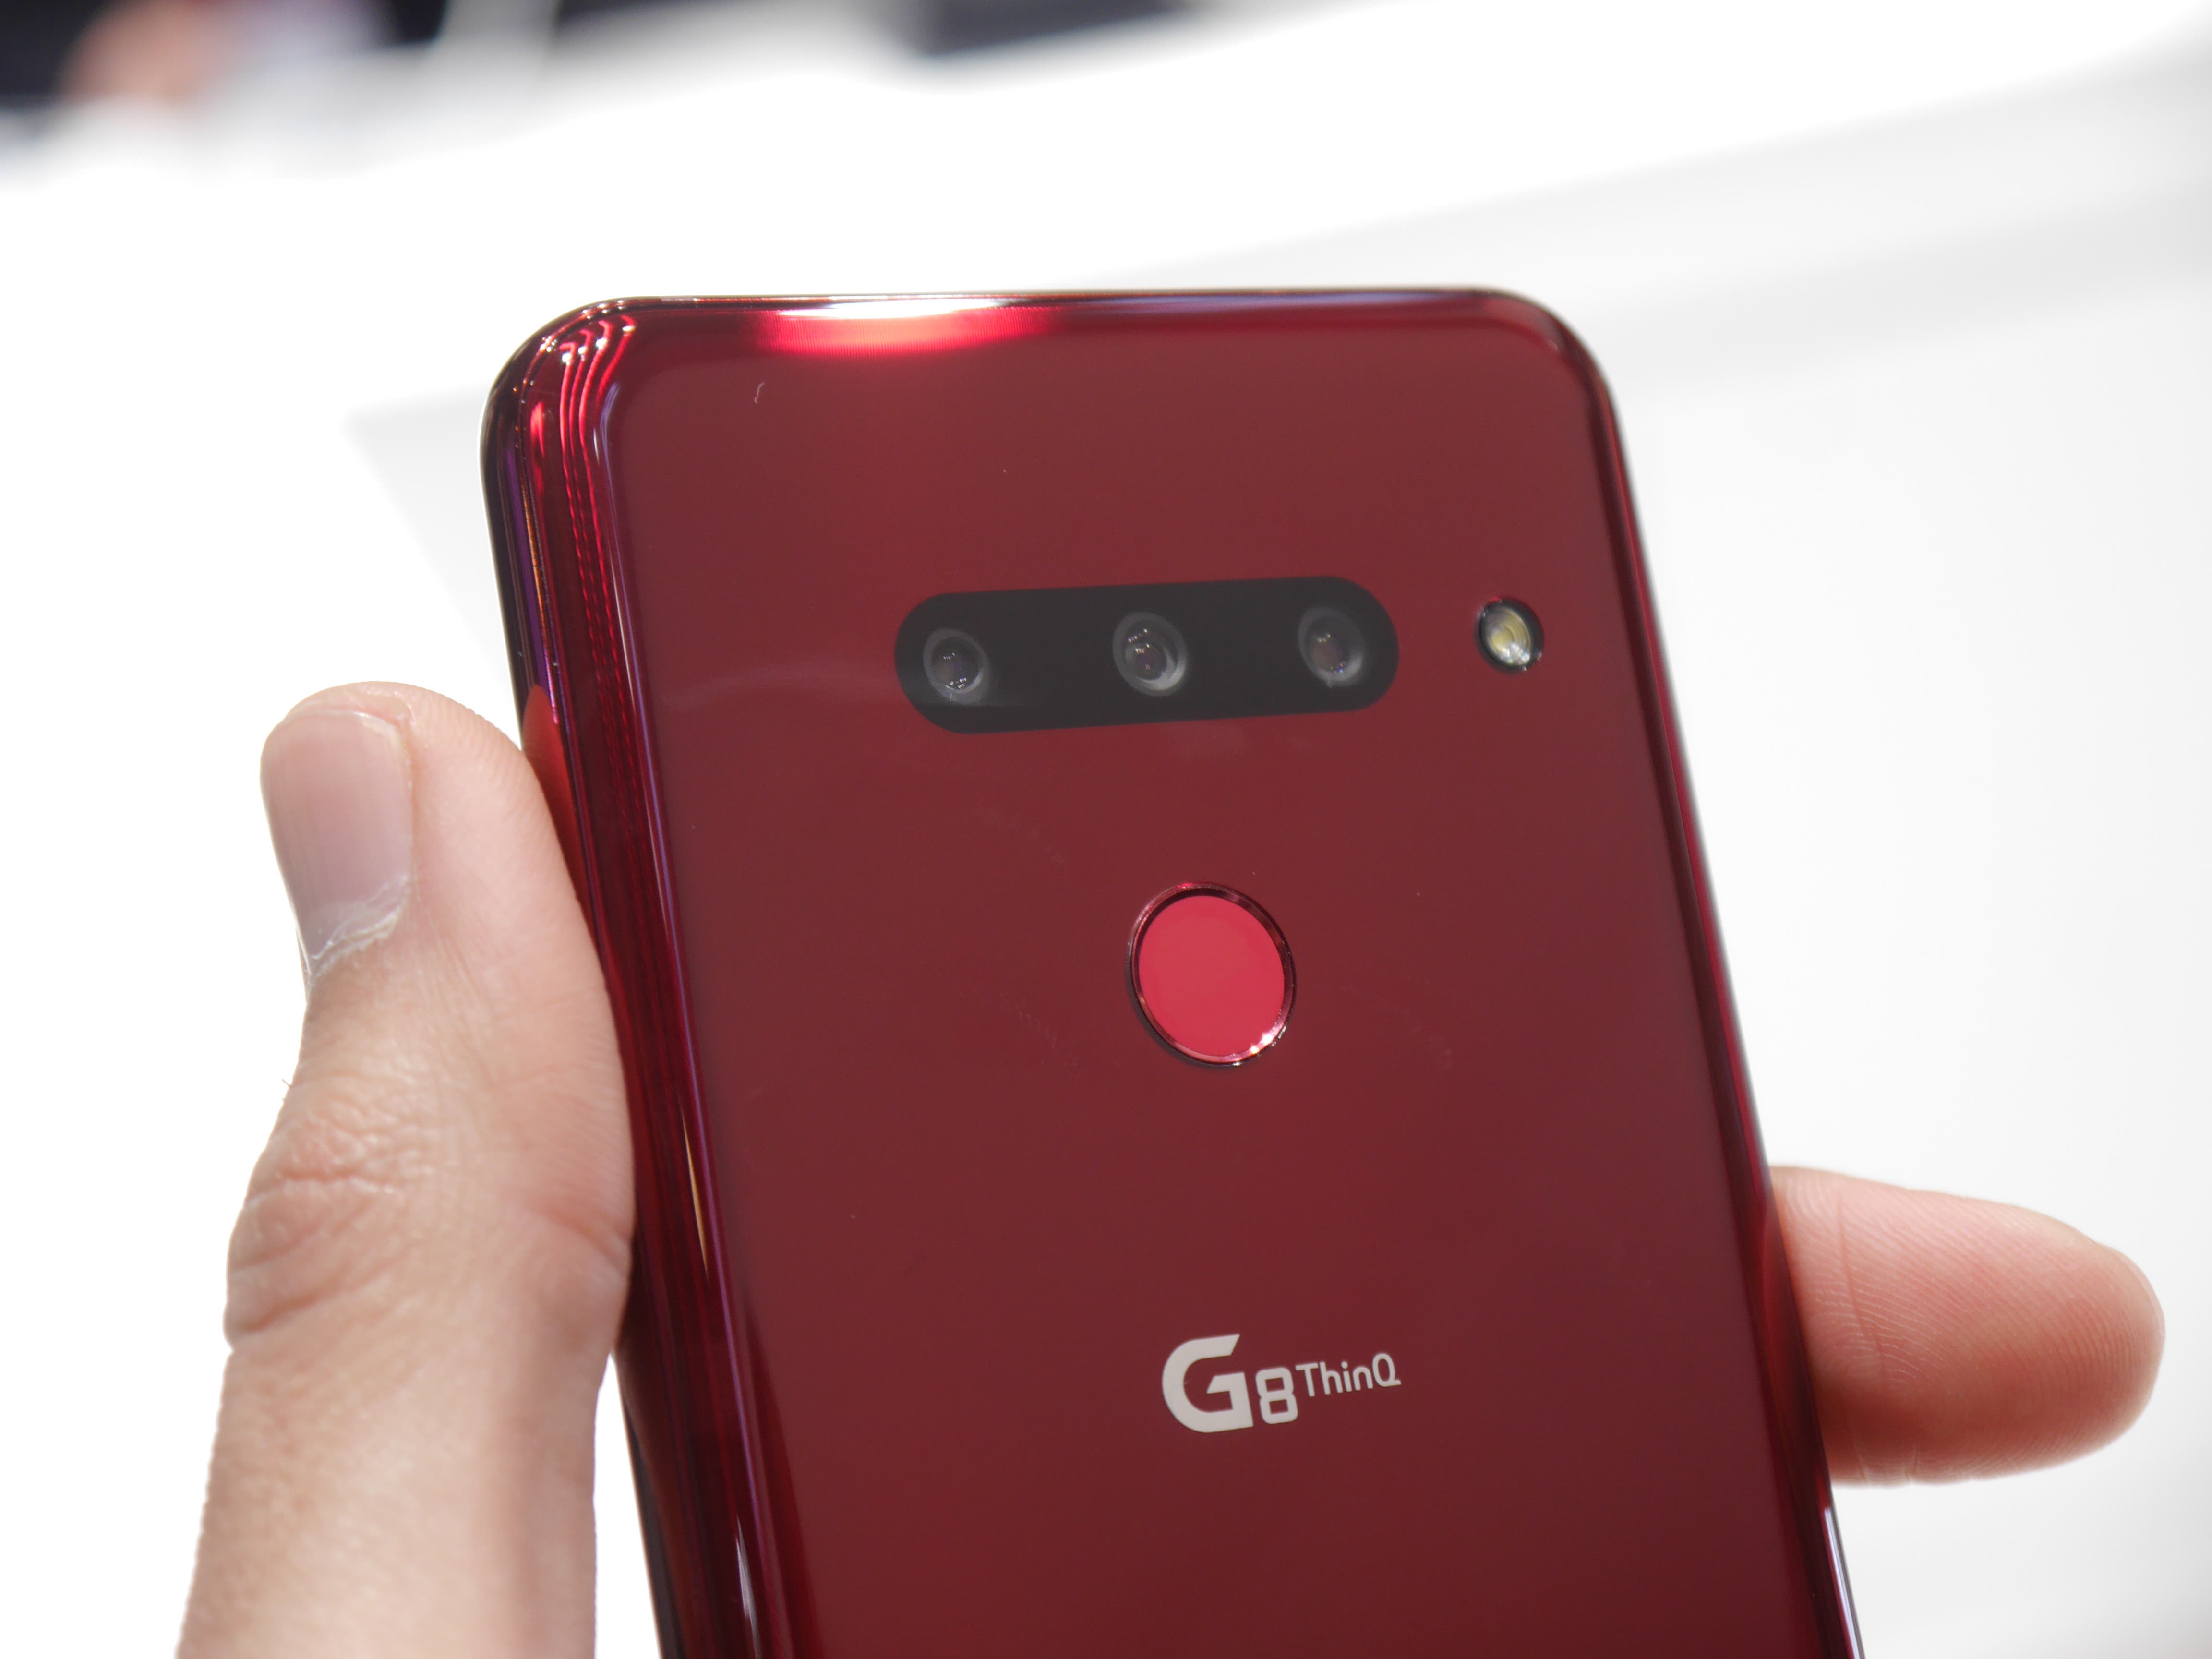 LG G8 ThinQ Hands-On From MWC 2019